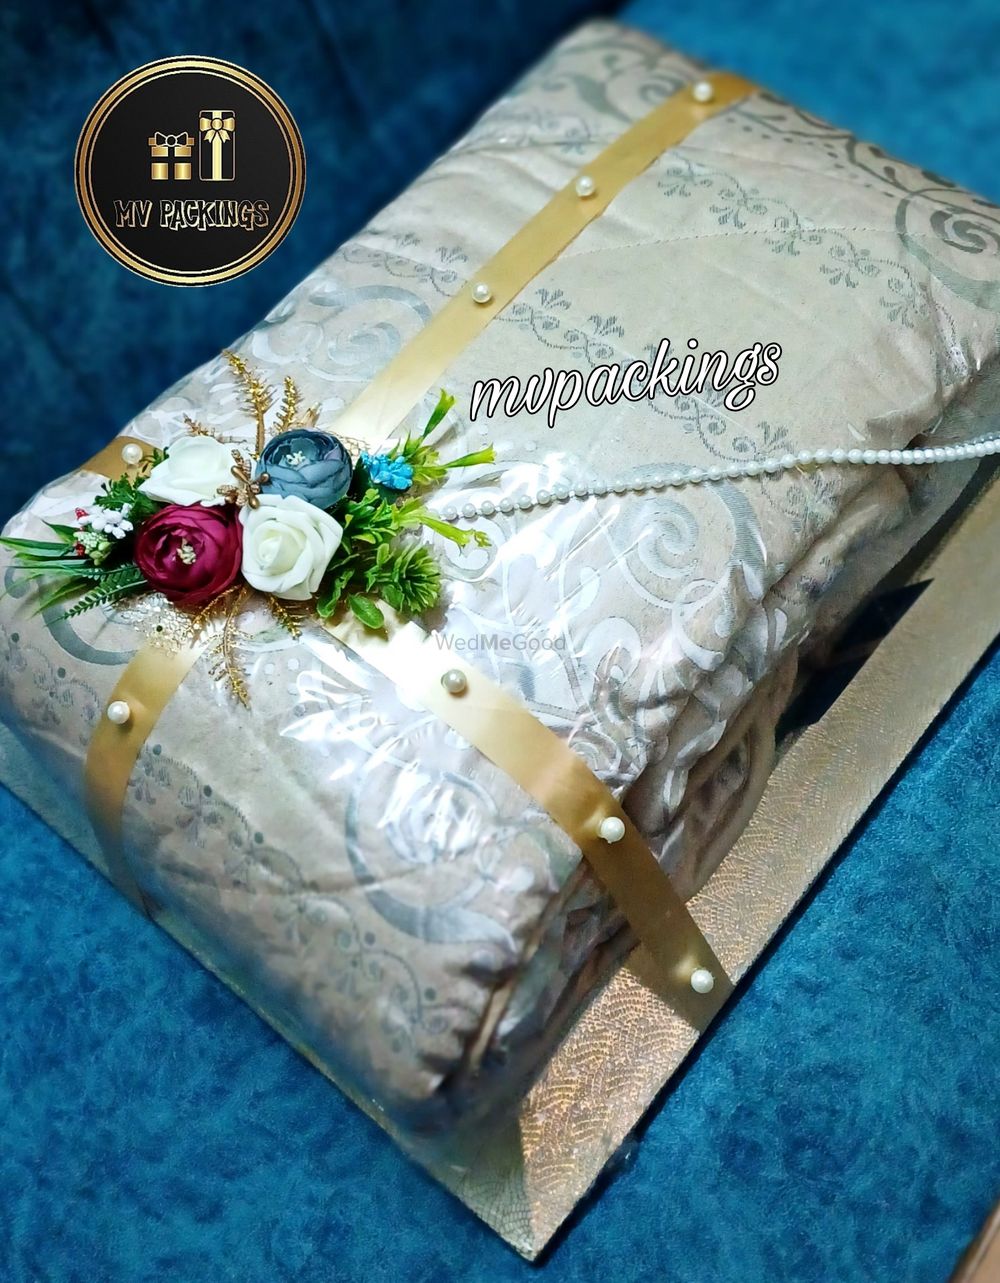 Photo From Packaging - By MV Packings